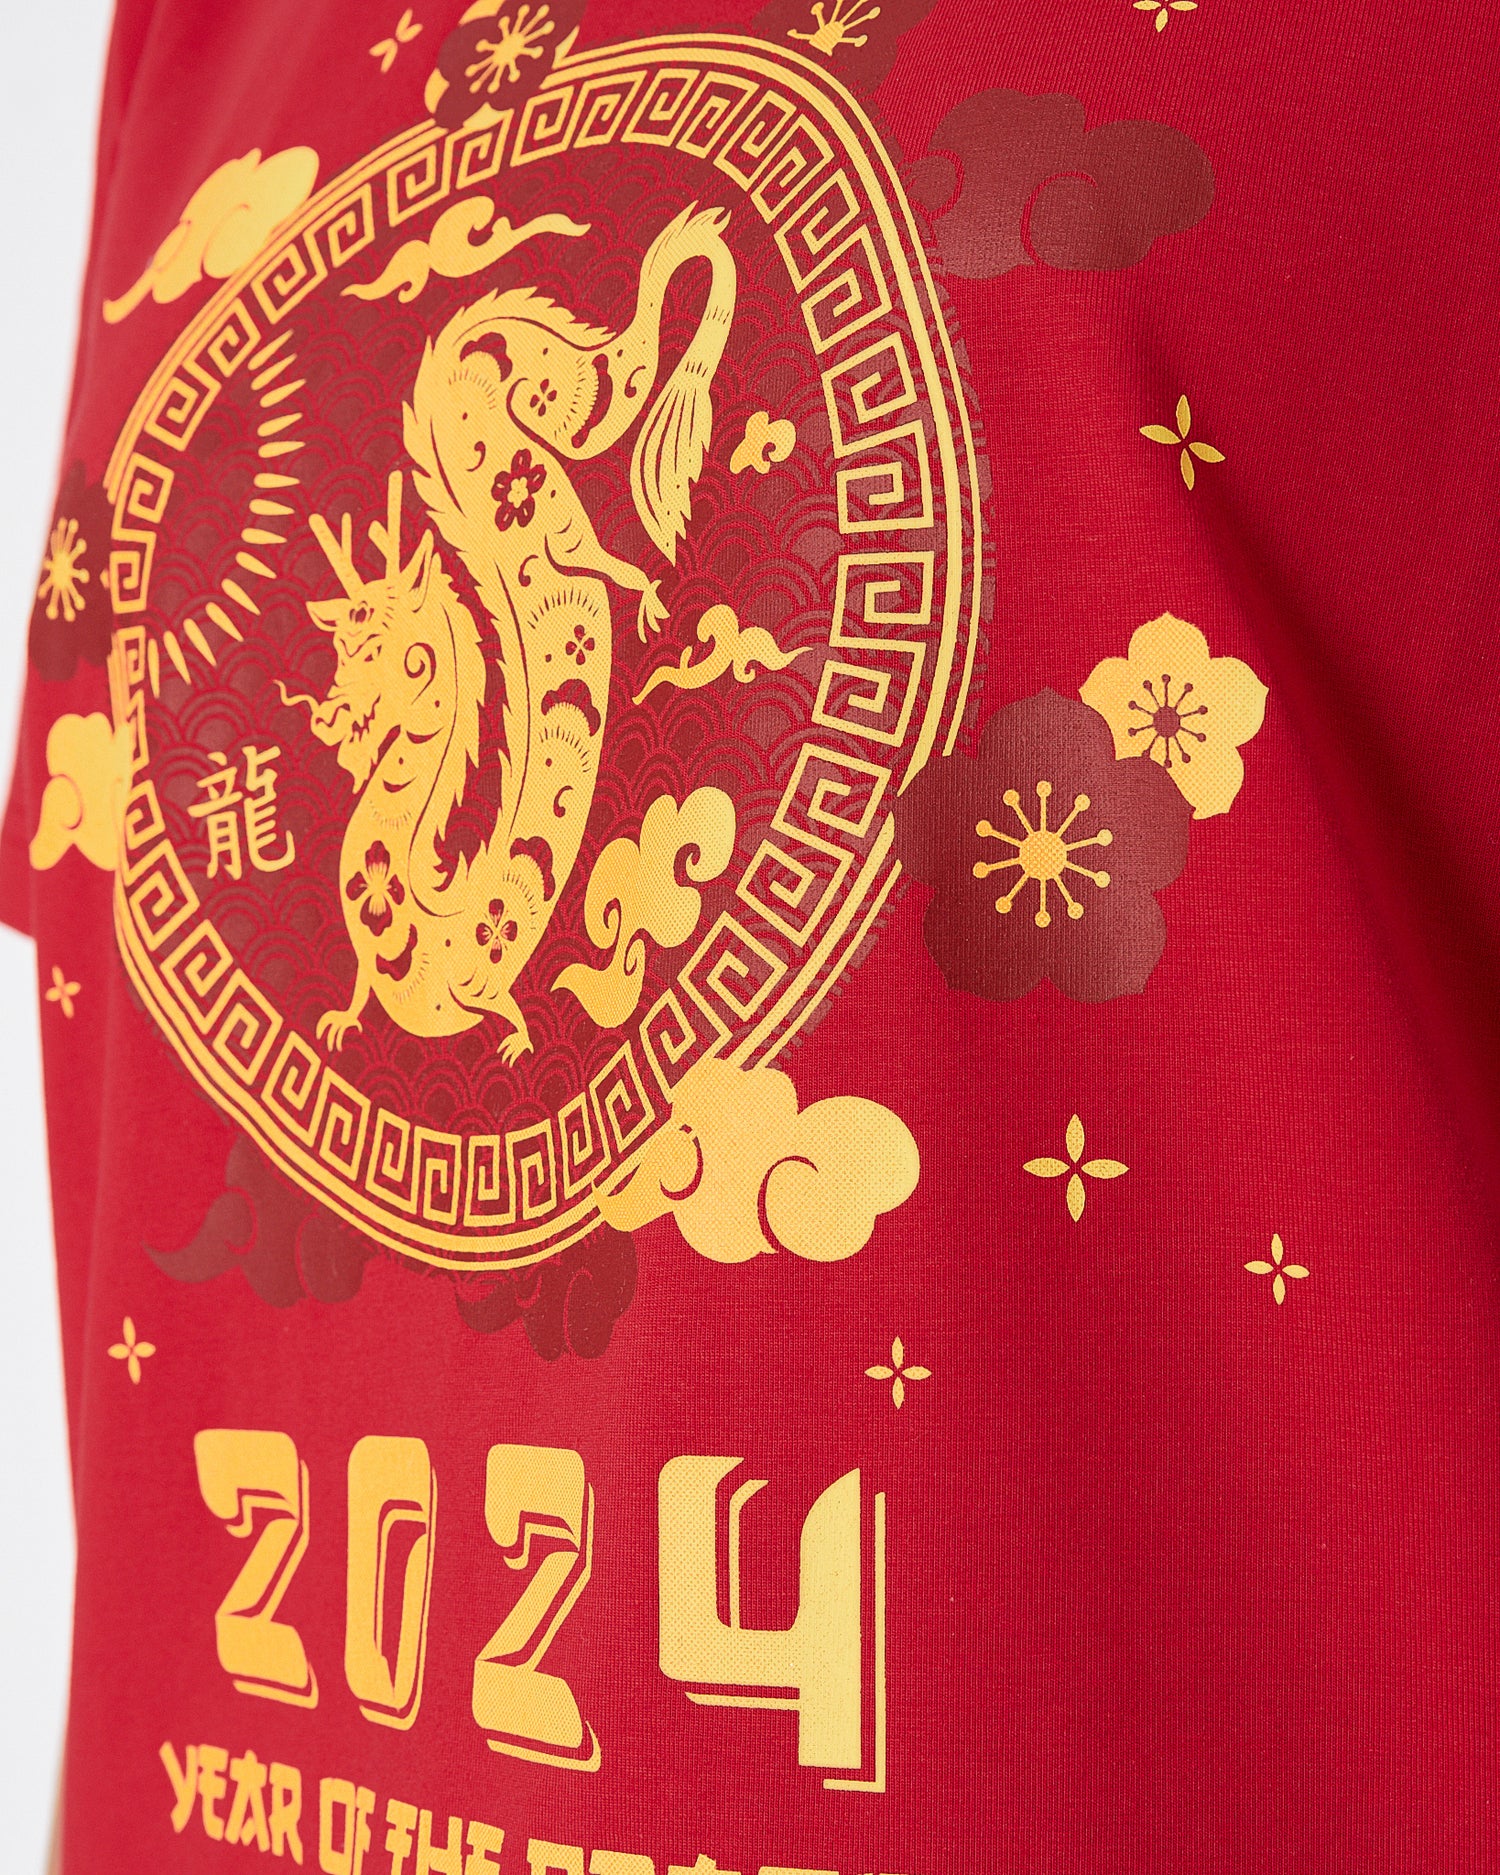 MOI Year Of The Dragon Unisex Red T-Shirt 14.50